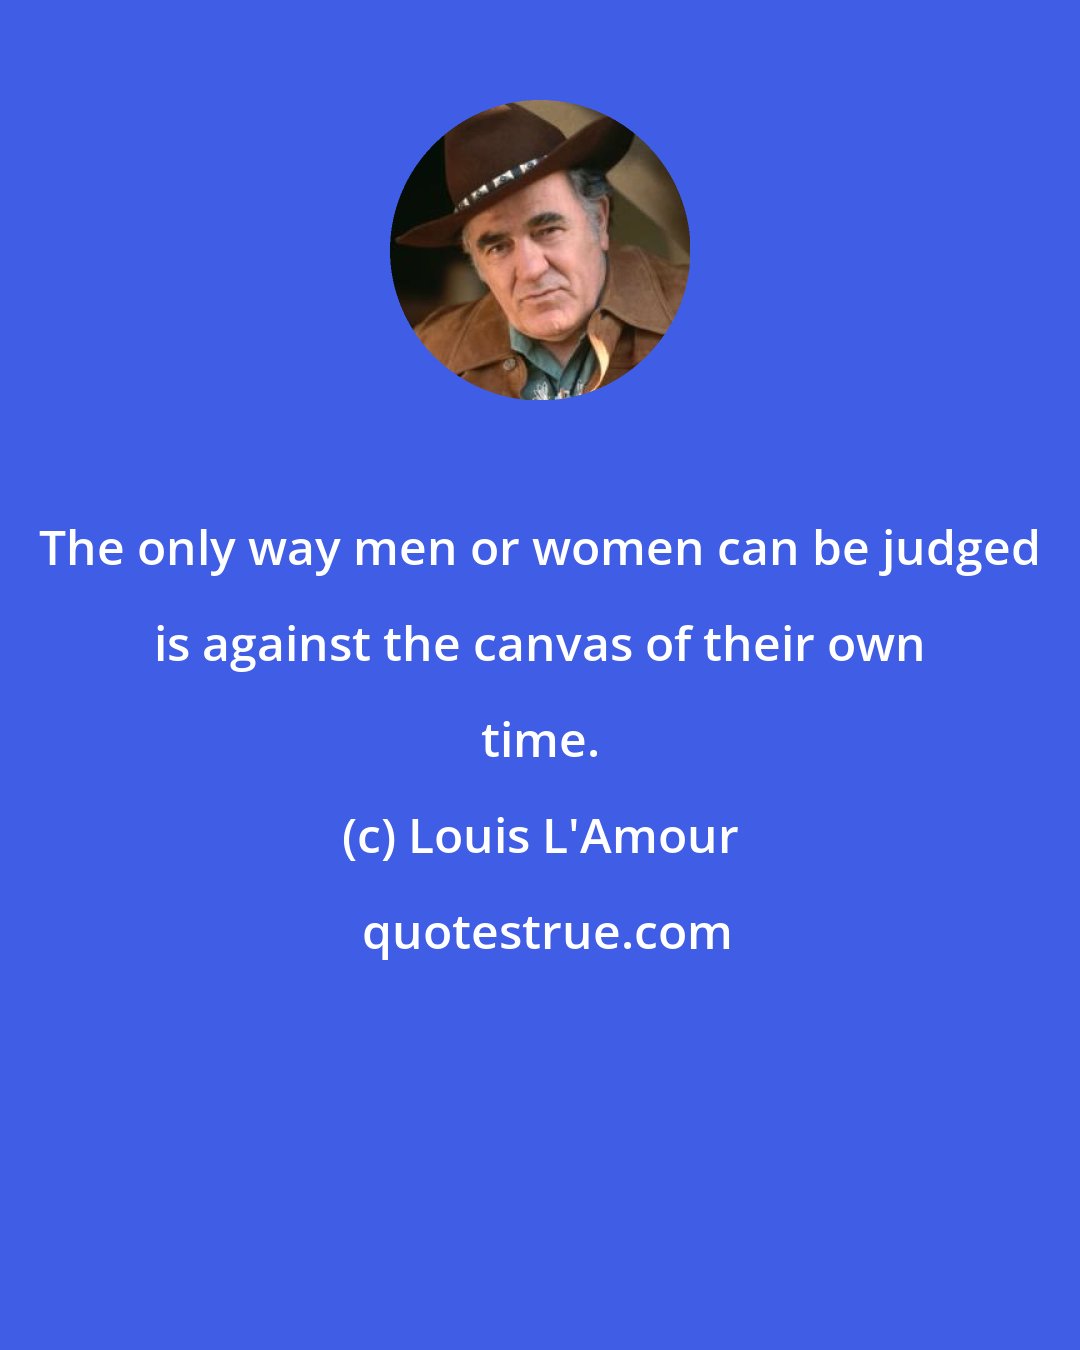 Louis L'Amour: The only way men or women can be judged is against the canvas of their own time.